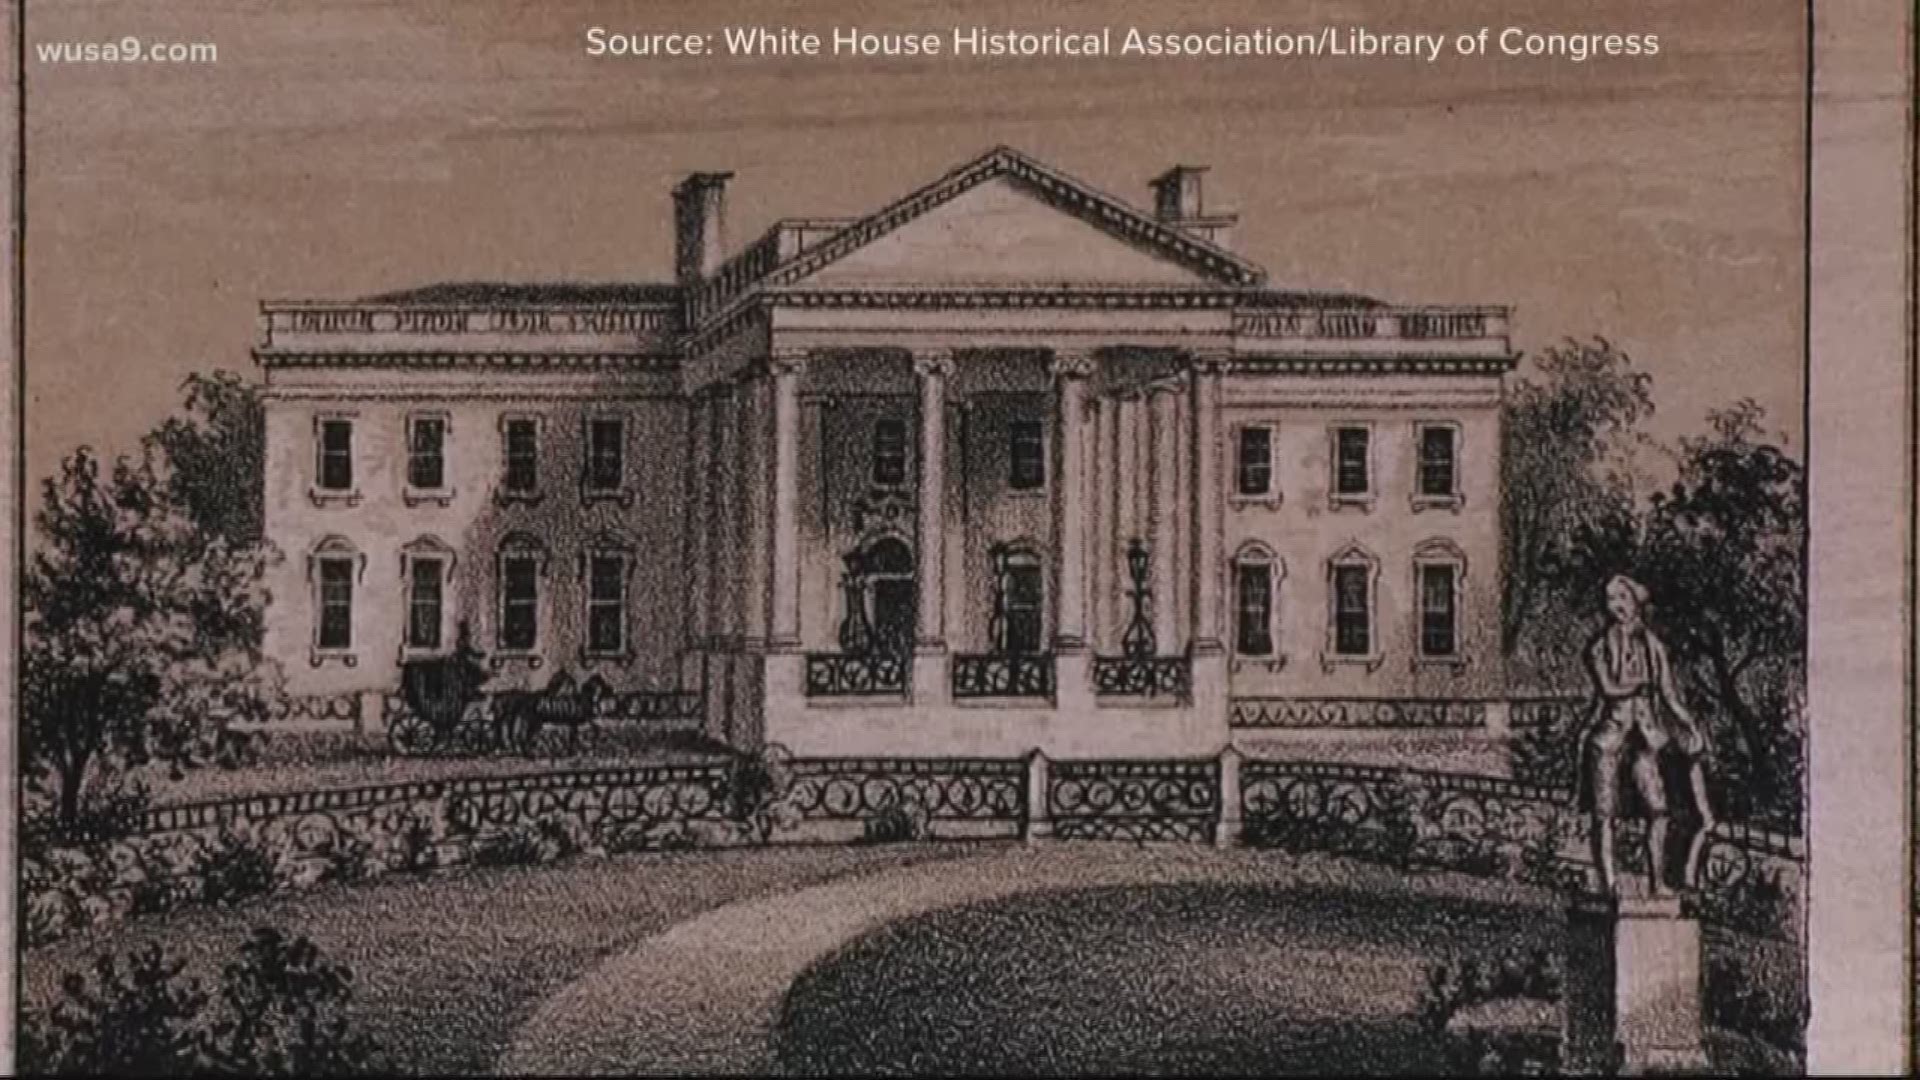 The White House Historical Association is exploring the history of those enslaved people with an online exhibit called "Slavery in the President’s Neighborhood."